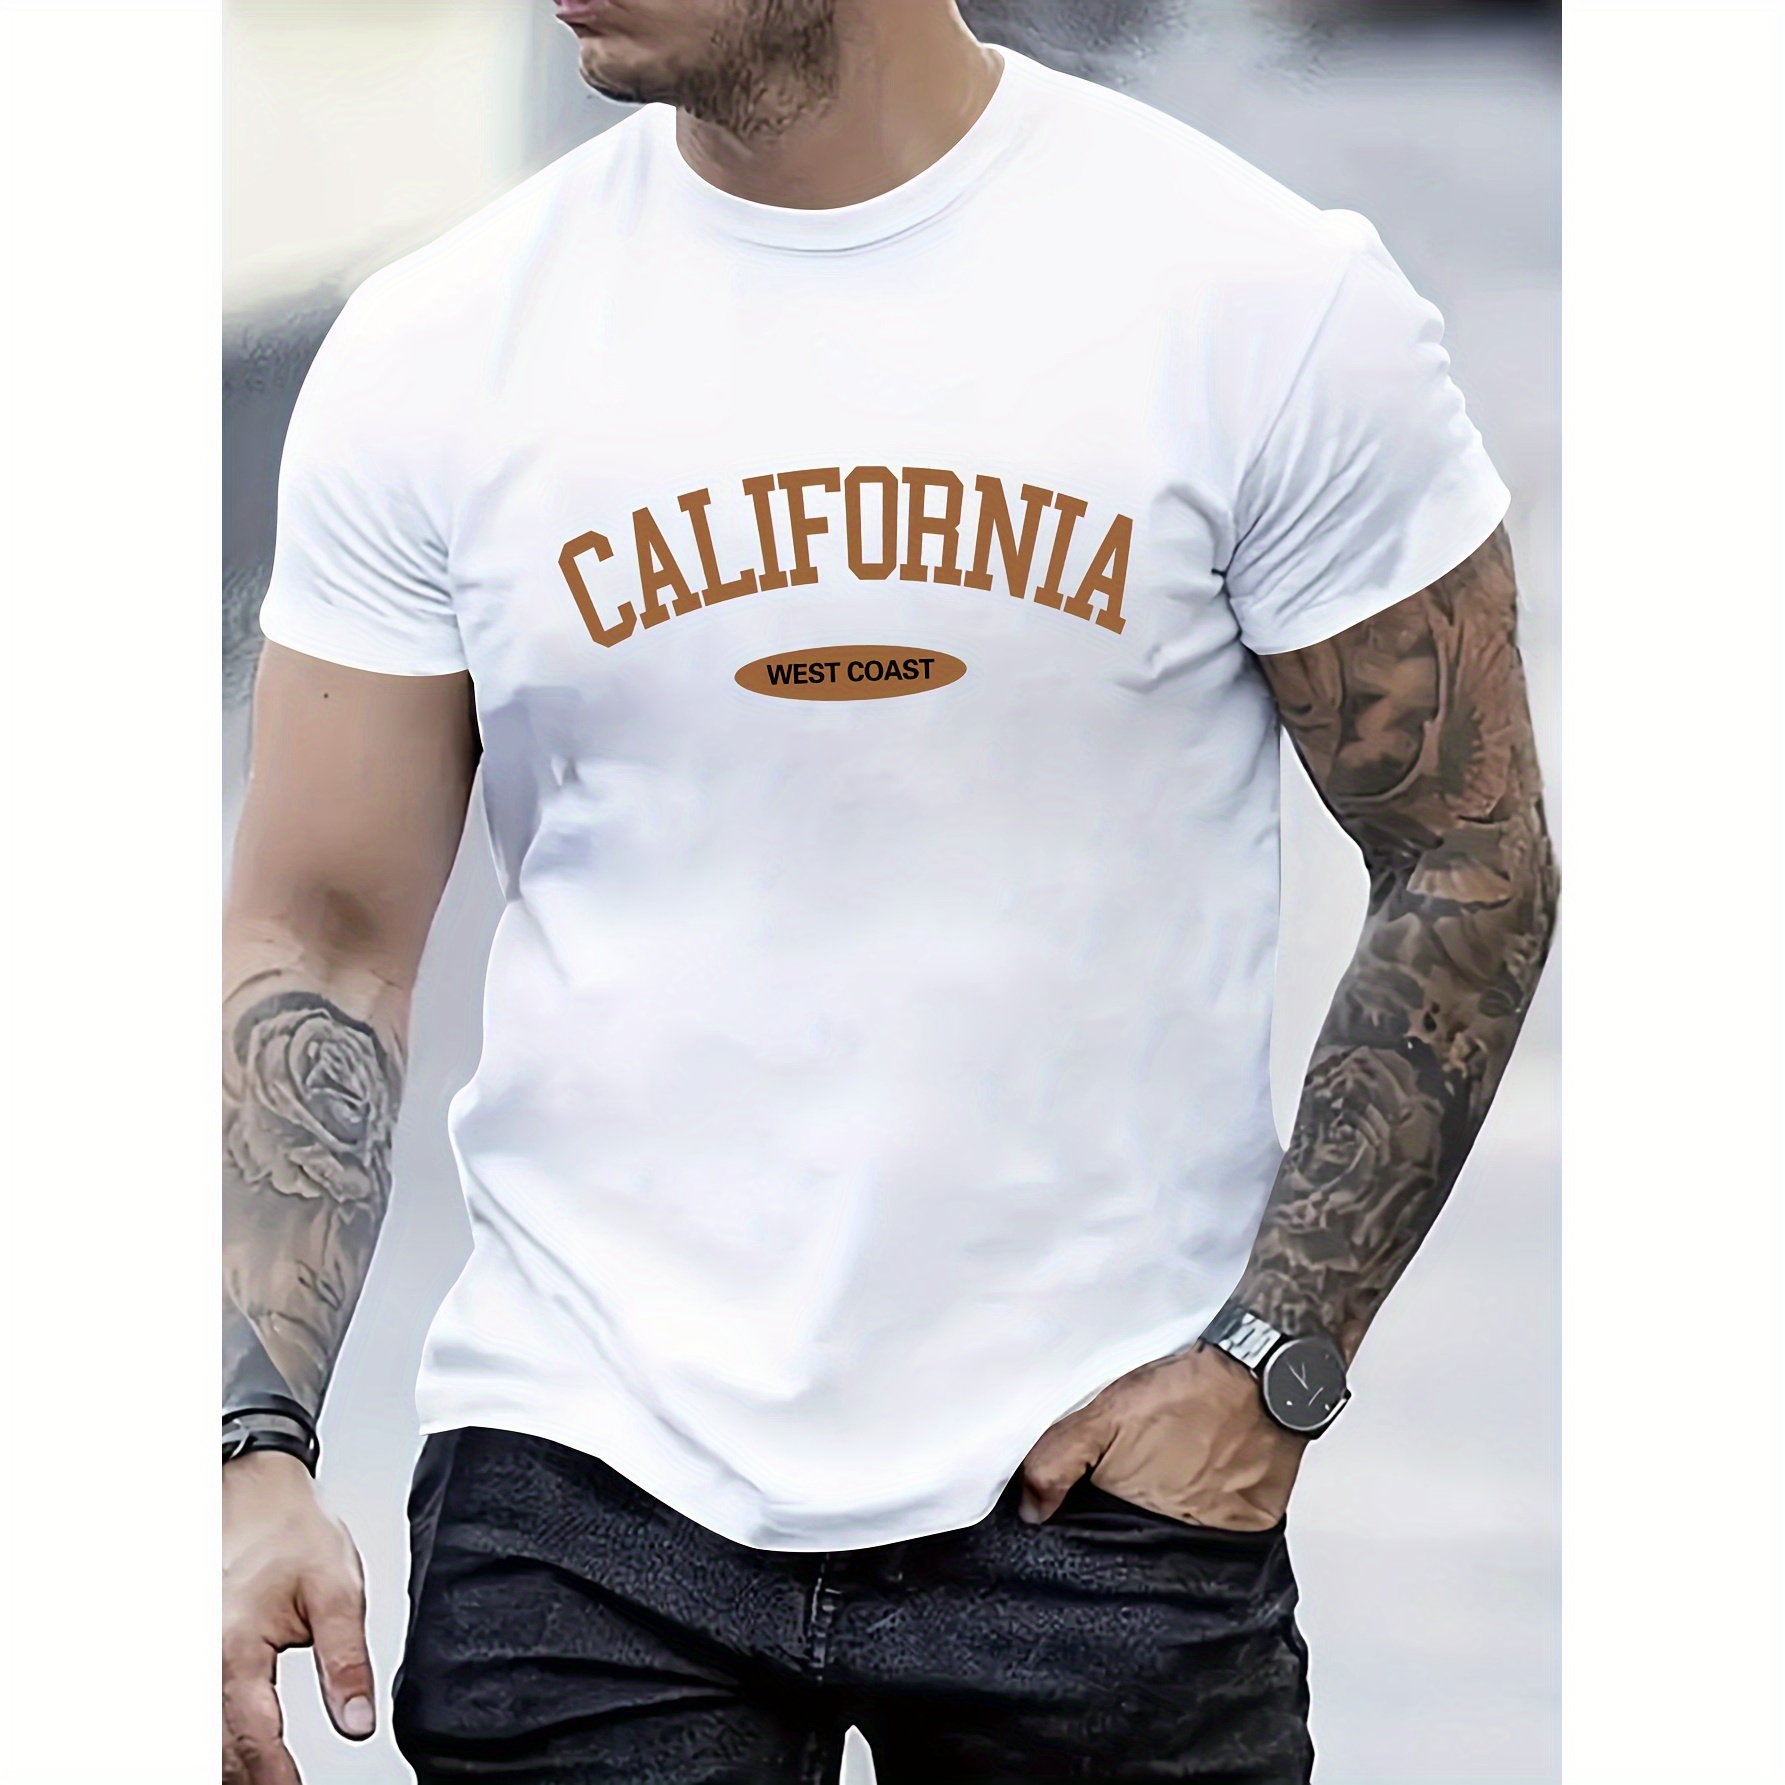 

California Letter Print, Men's Round Neck Short Sleeve Tshirt, Casual Comfy Lightweight Top For Summer